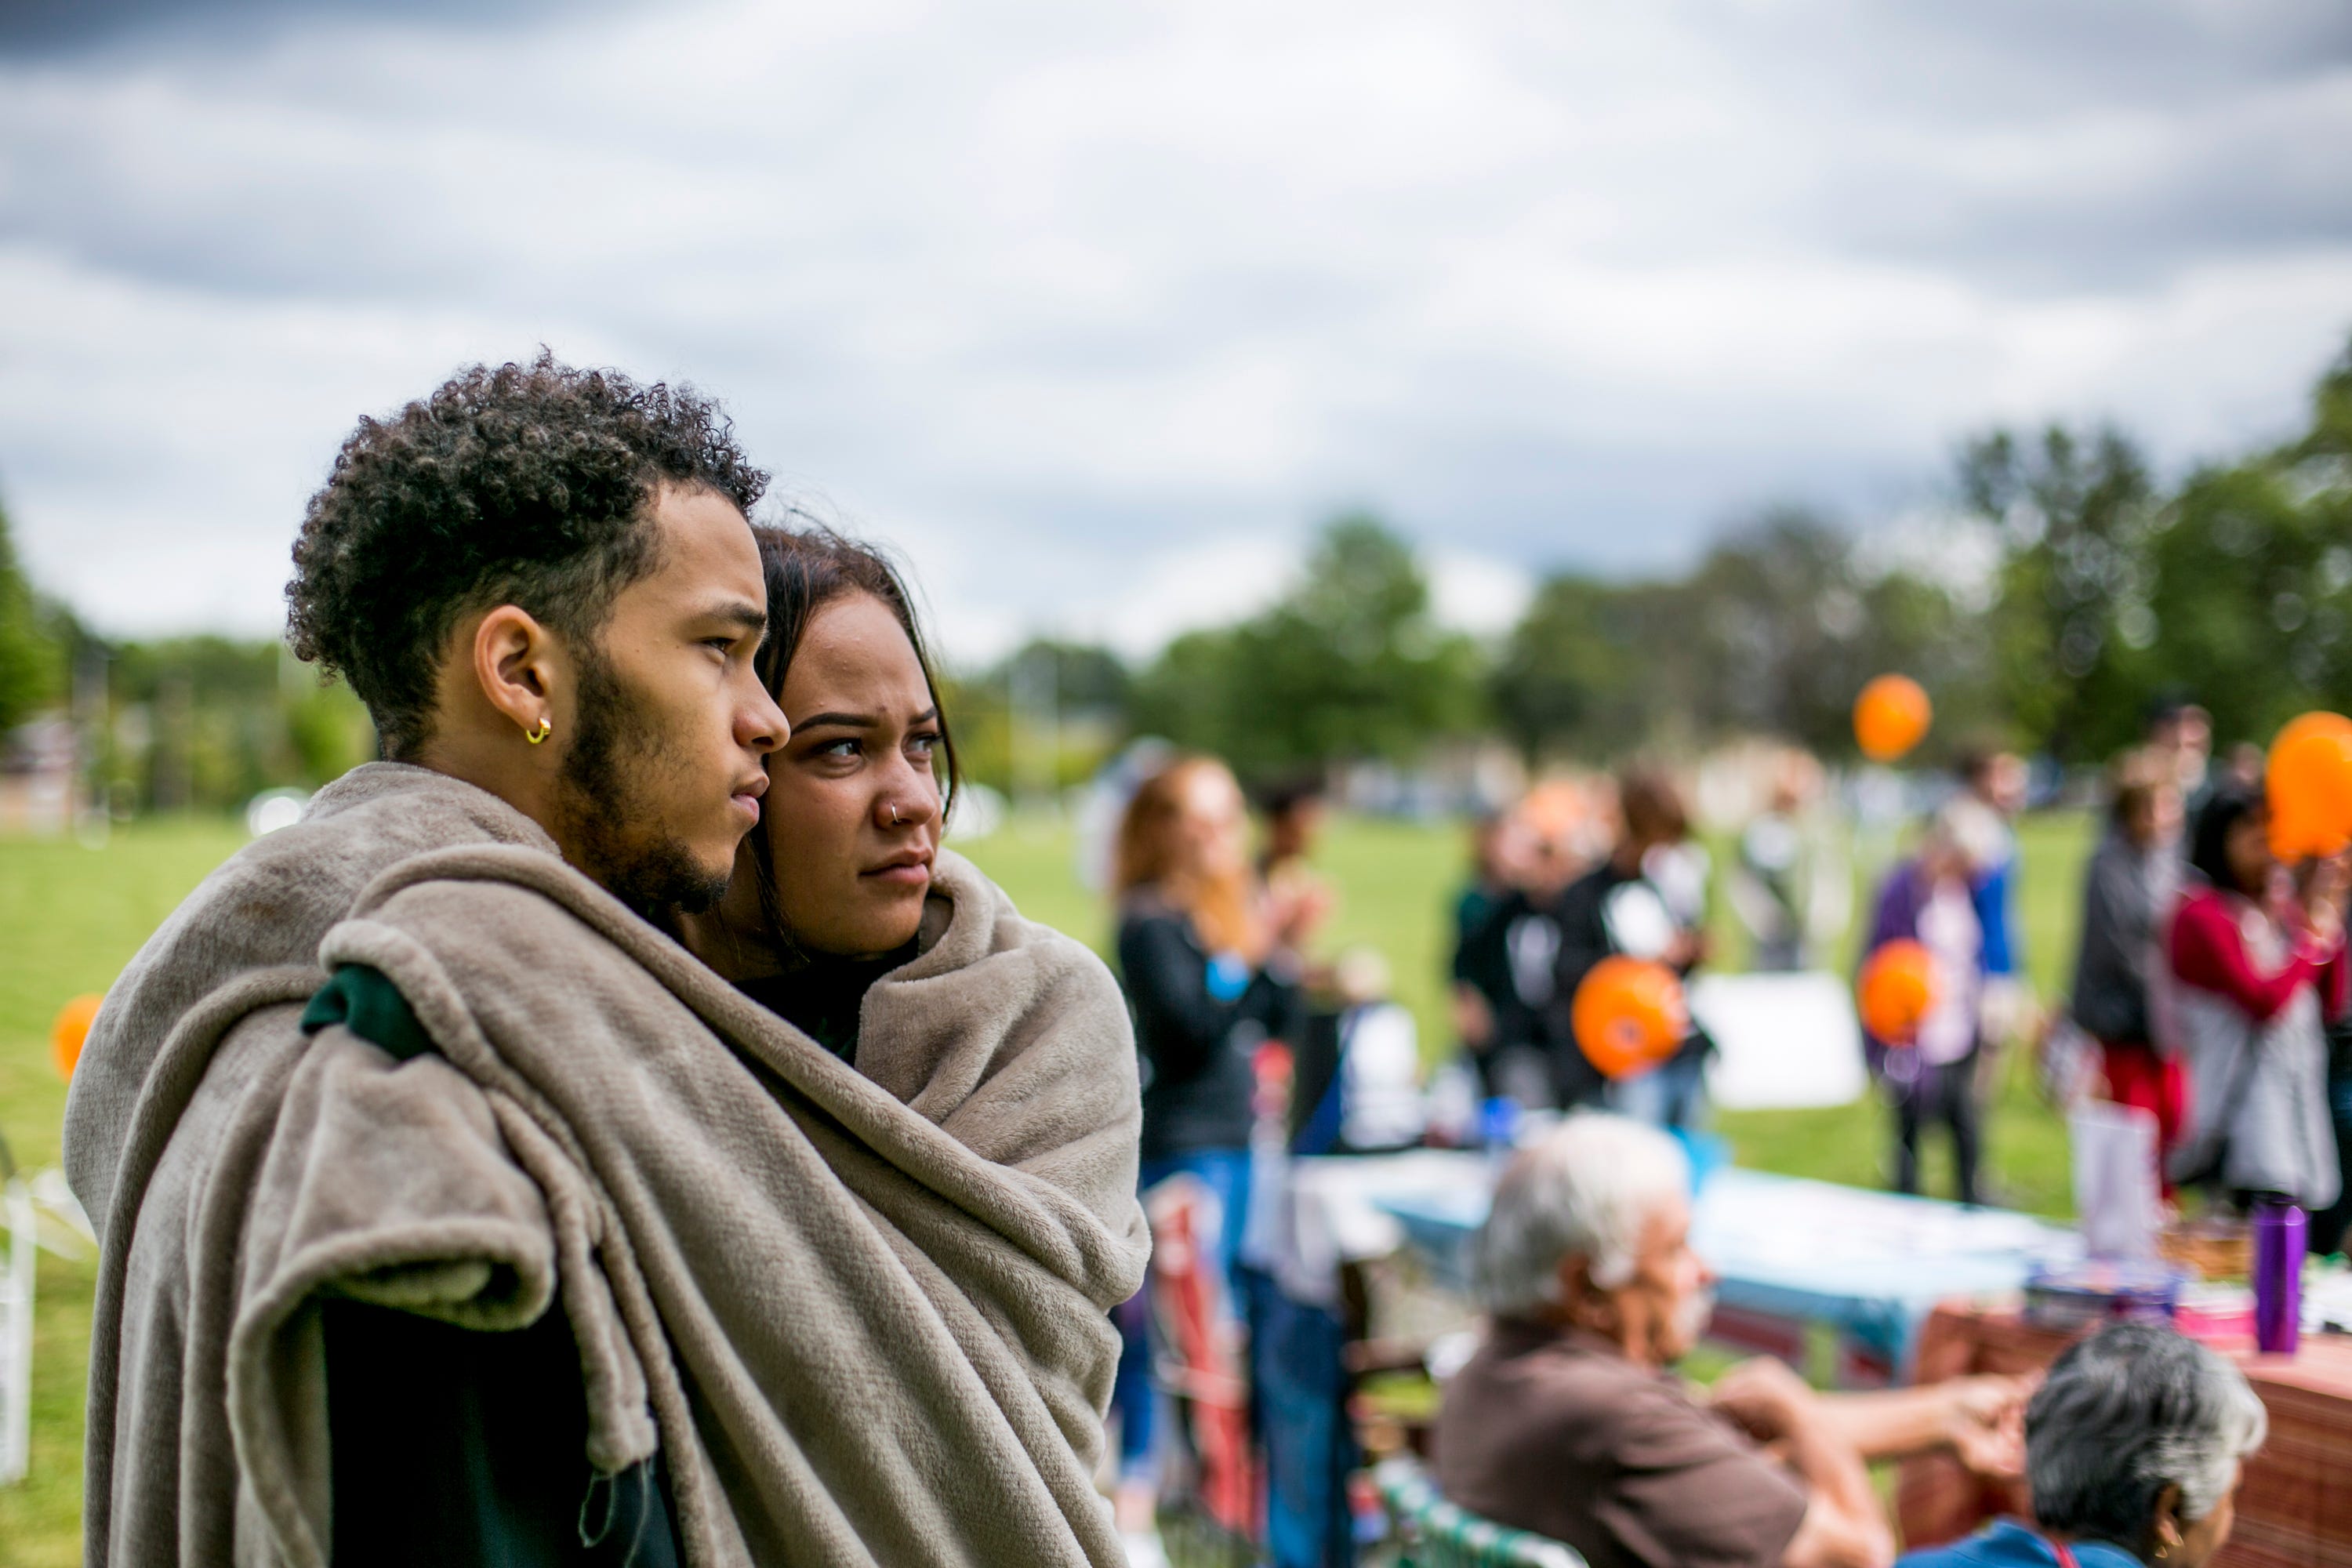 Mibdrea Ray, 18, a sexual assault survivor from Kalamazoo and her boyfriend Mark Anderson, 18, of Kalamazoo, listen to the speakers during the Slut Walk at Palmer Park in Detroit on September 22, 2018.